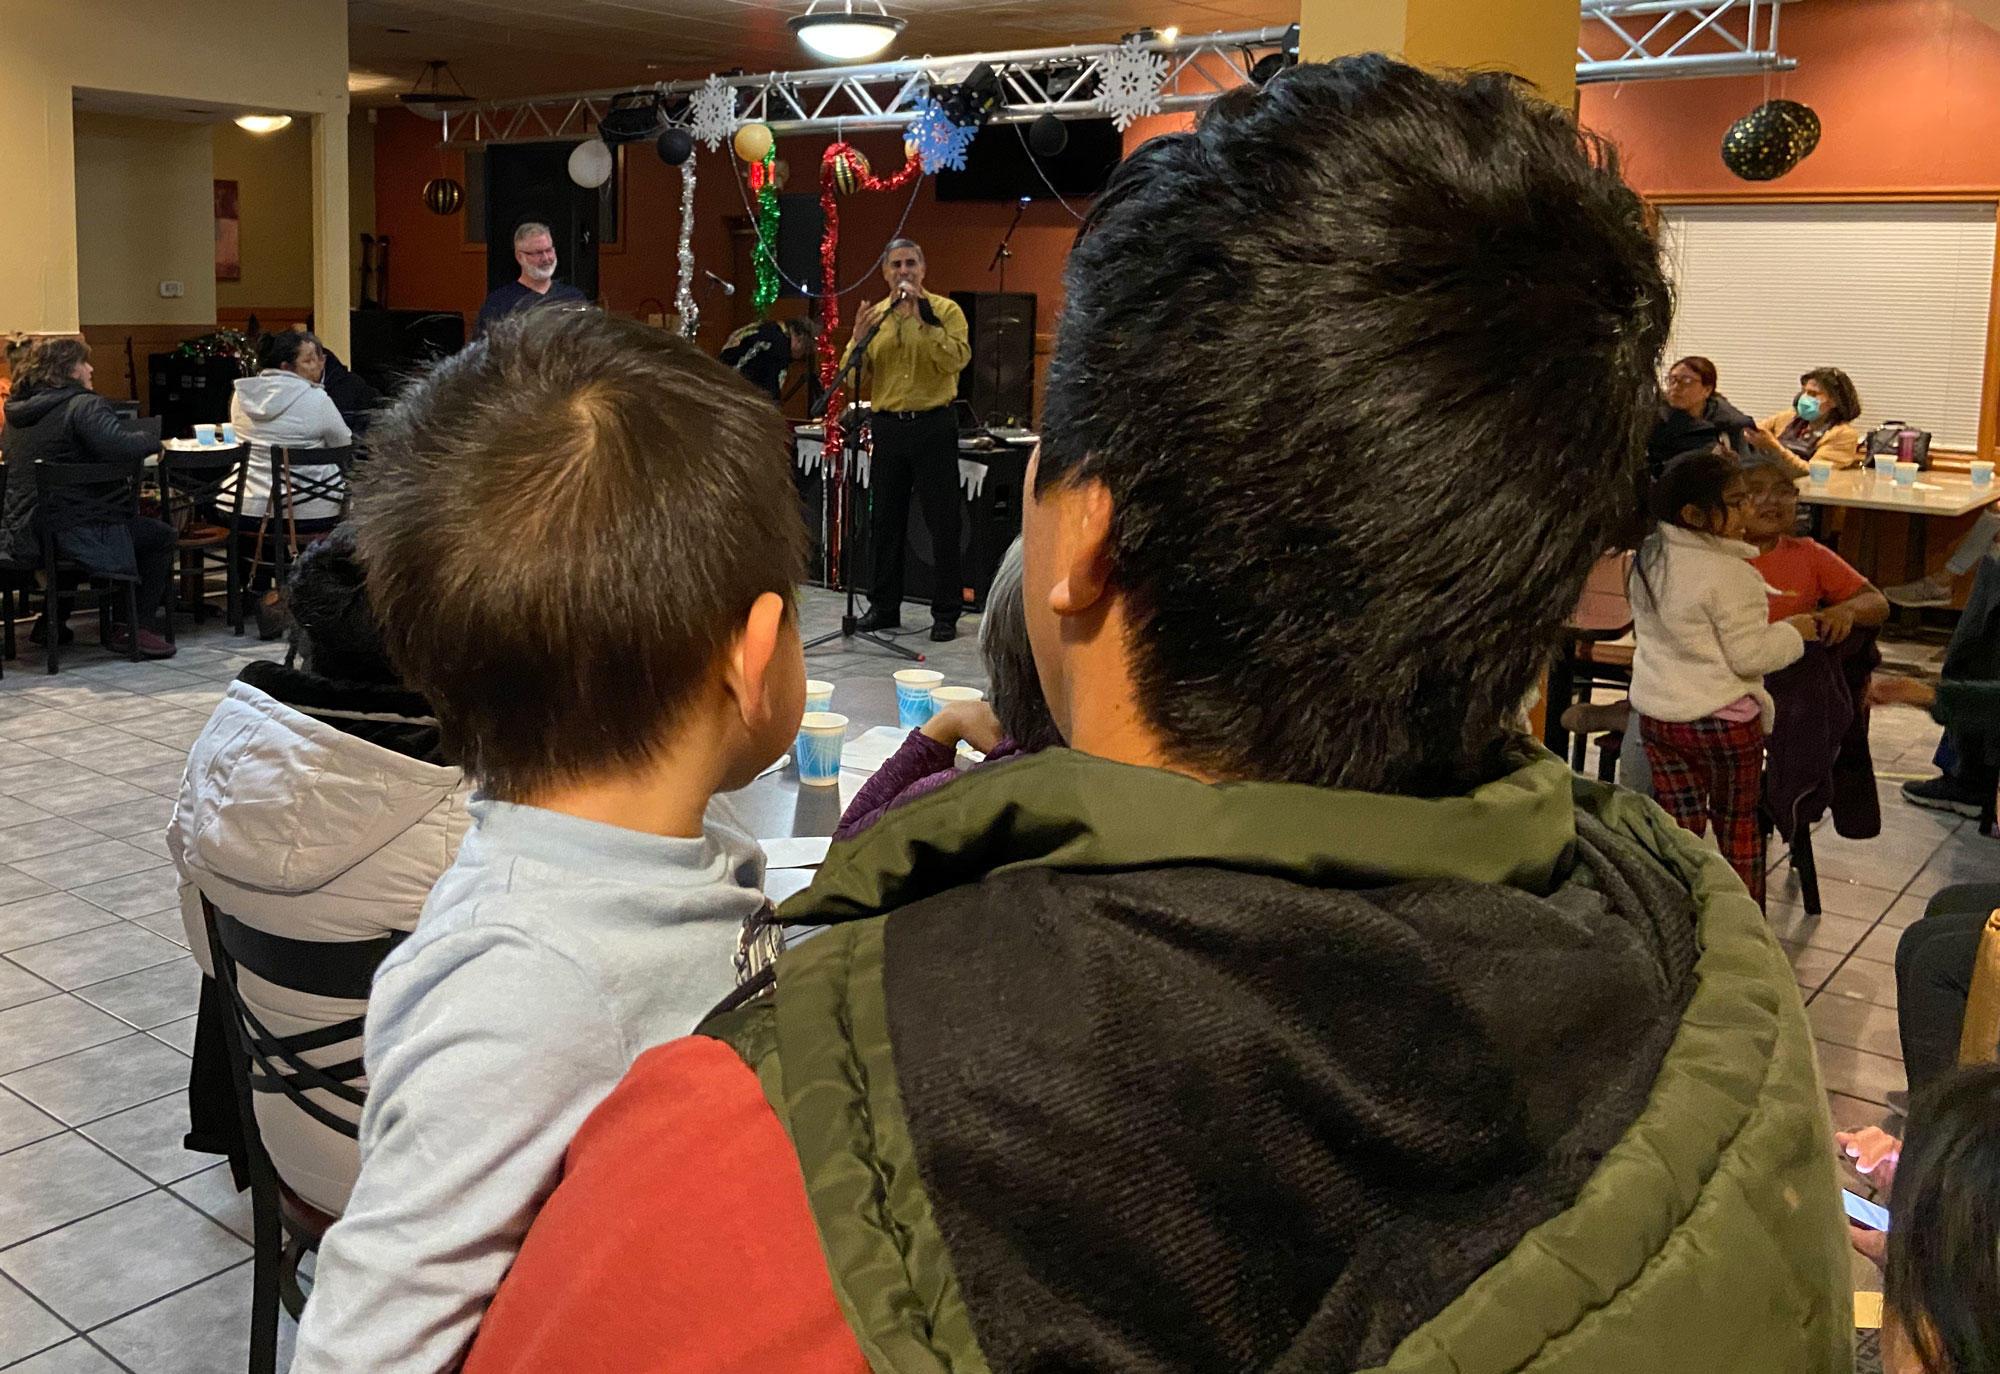 A Latino man holds a little boy while listening to a speaker at a COVID-19 town hall information event at a Mexican food restaurant.